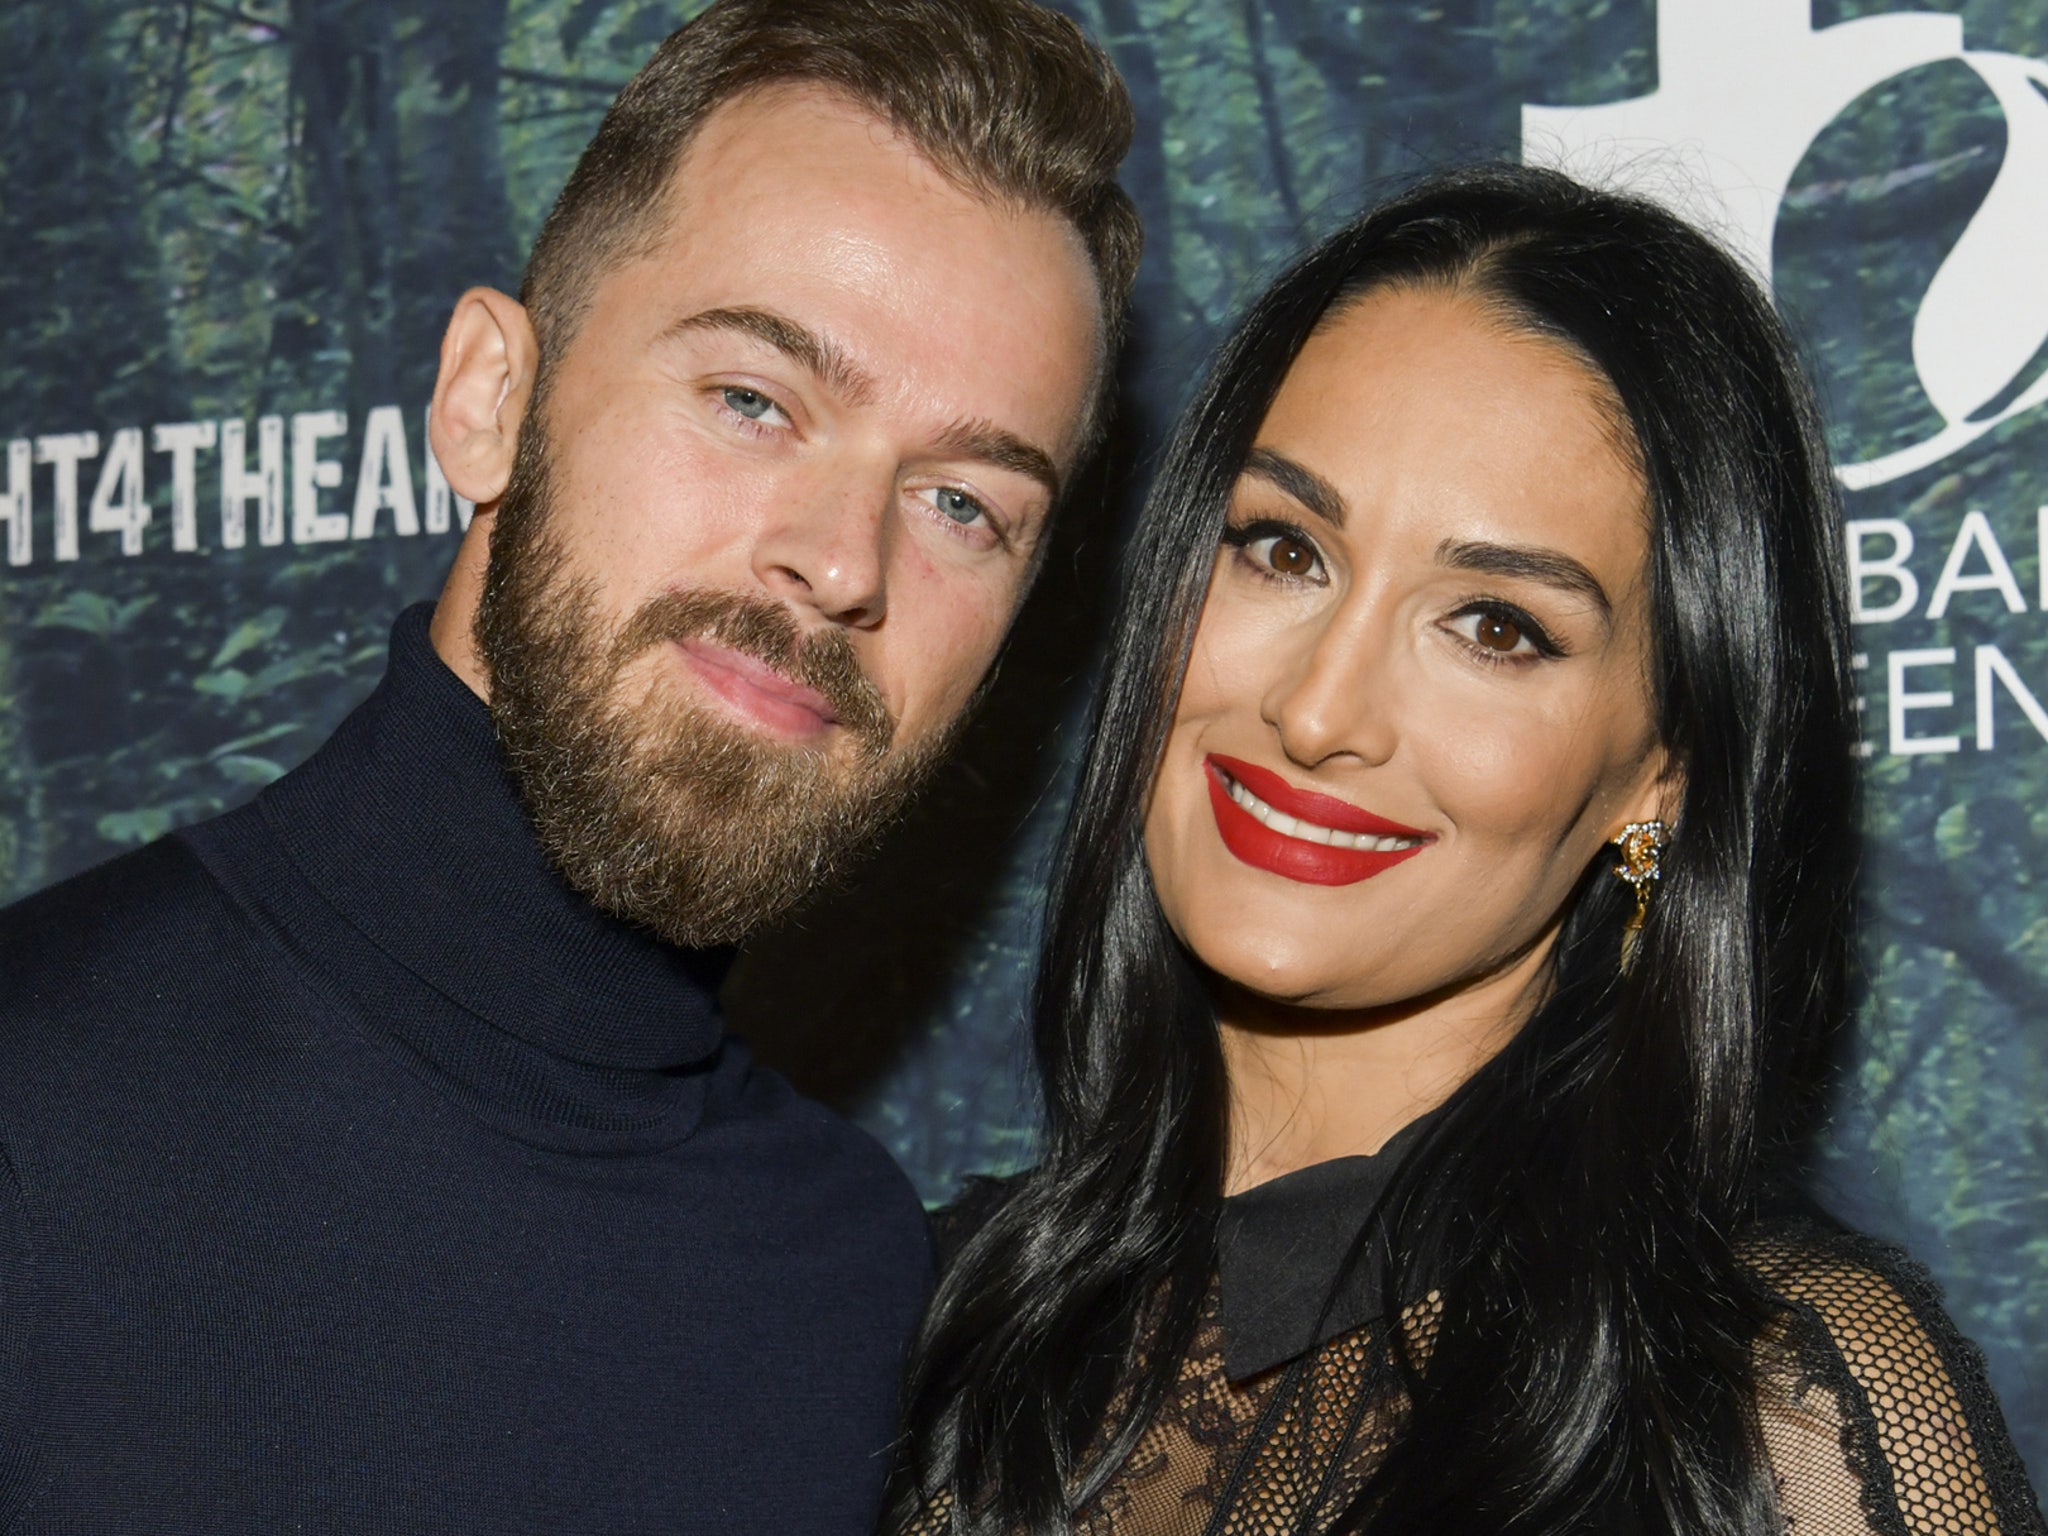 therealnikkibella and Artem Chigvintsev had their son, Matteo, as